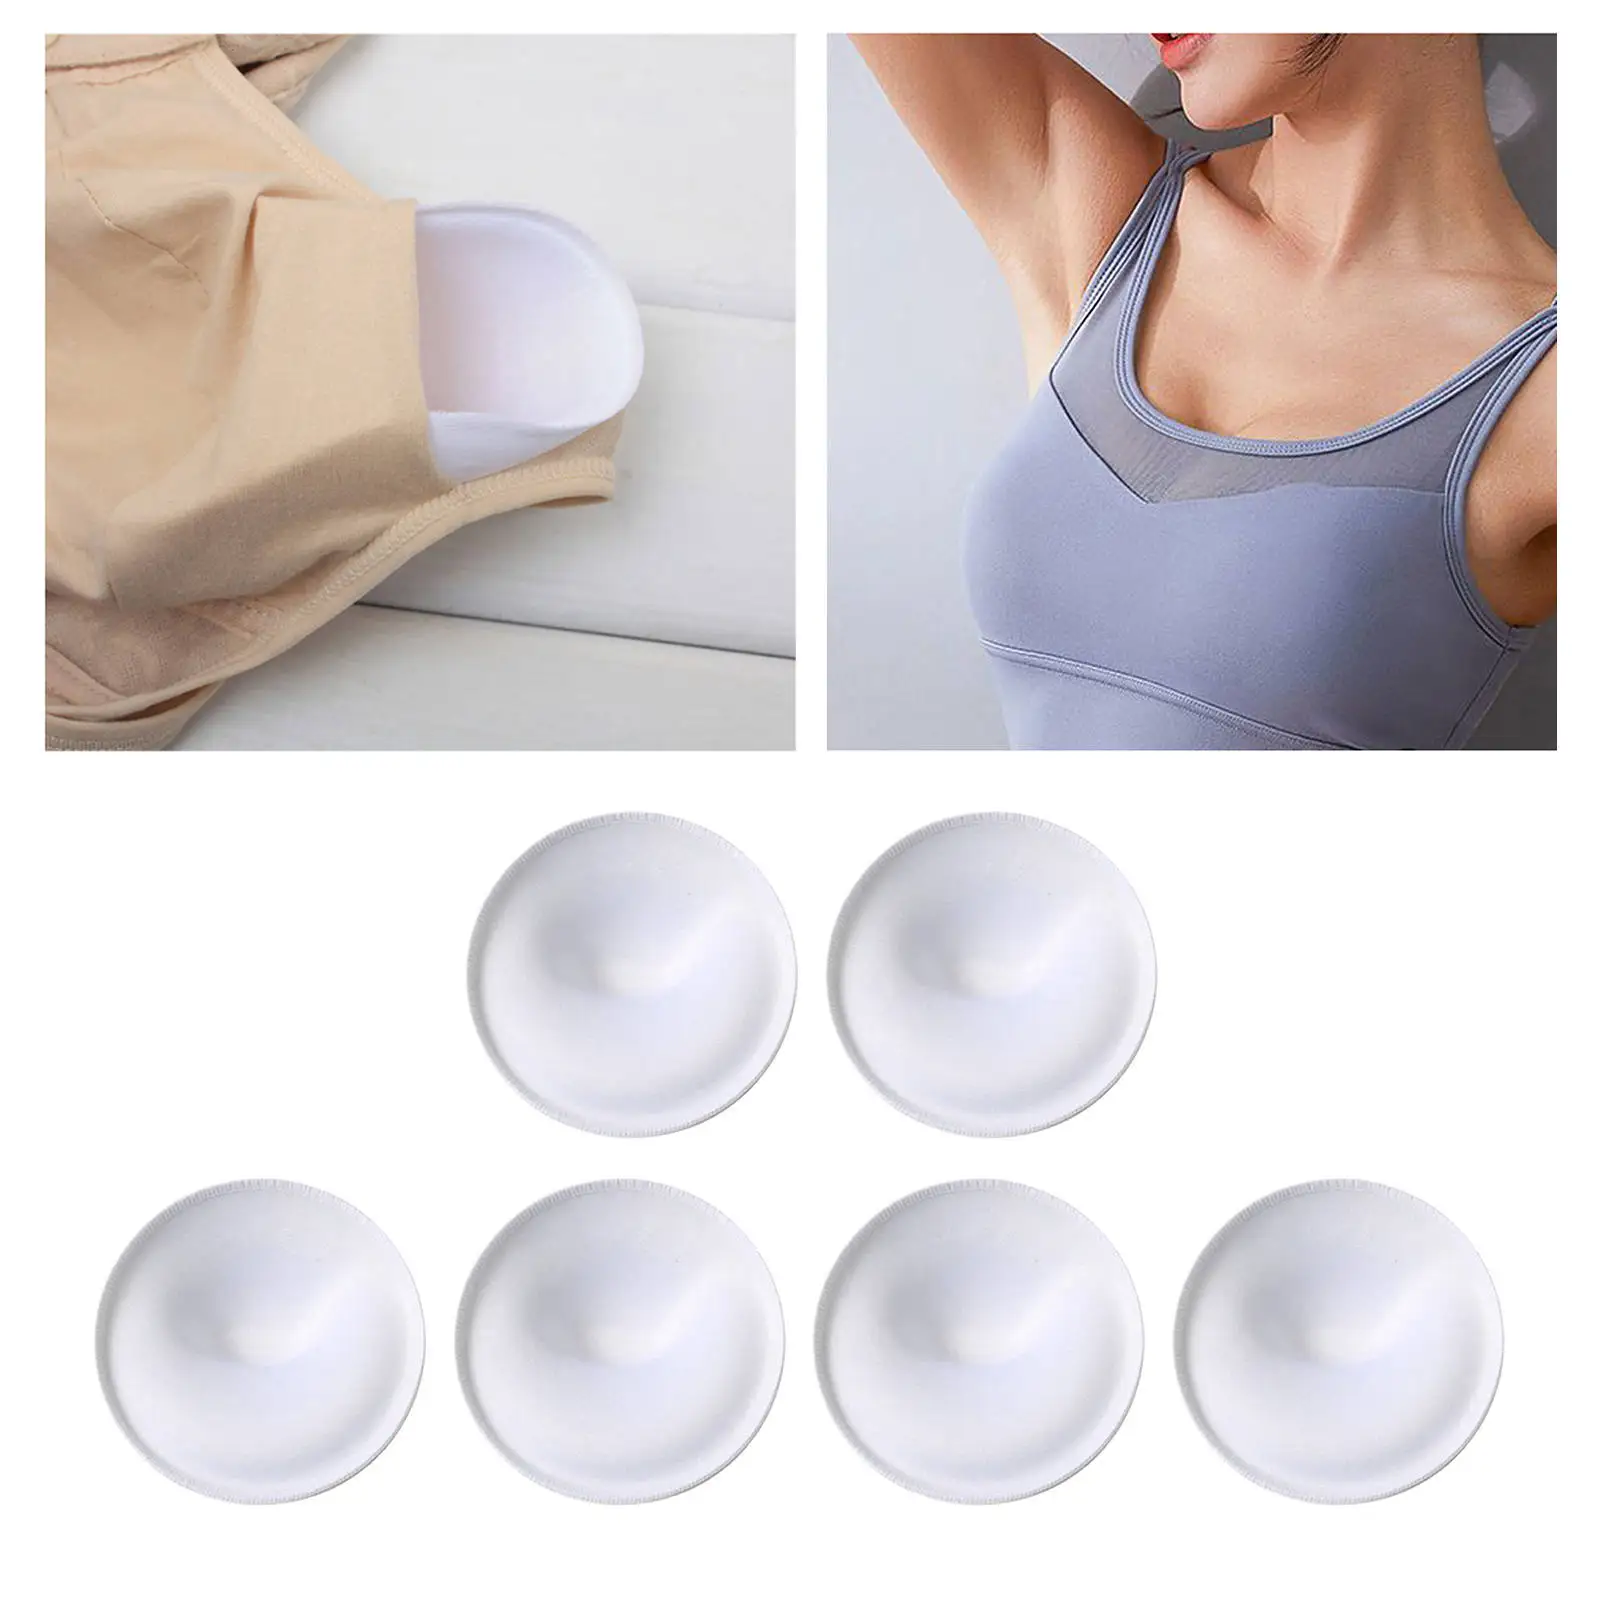 3 Pairs Removeable Triangle Bra Pads Inserts for Bikinis Tops Sports Bra Swimsuit for C D Cups Beige 